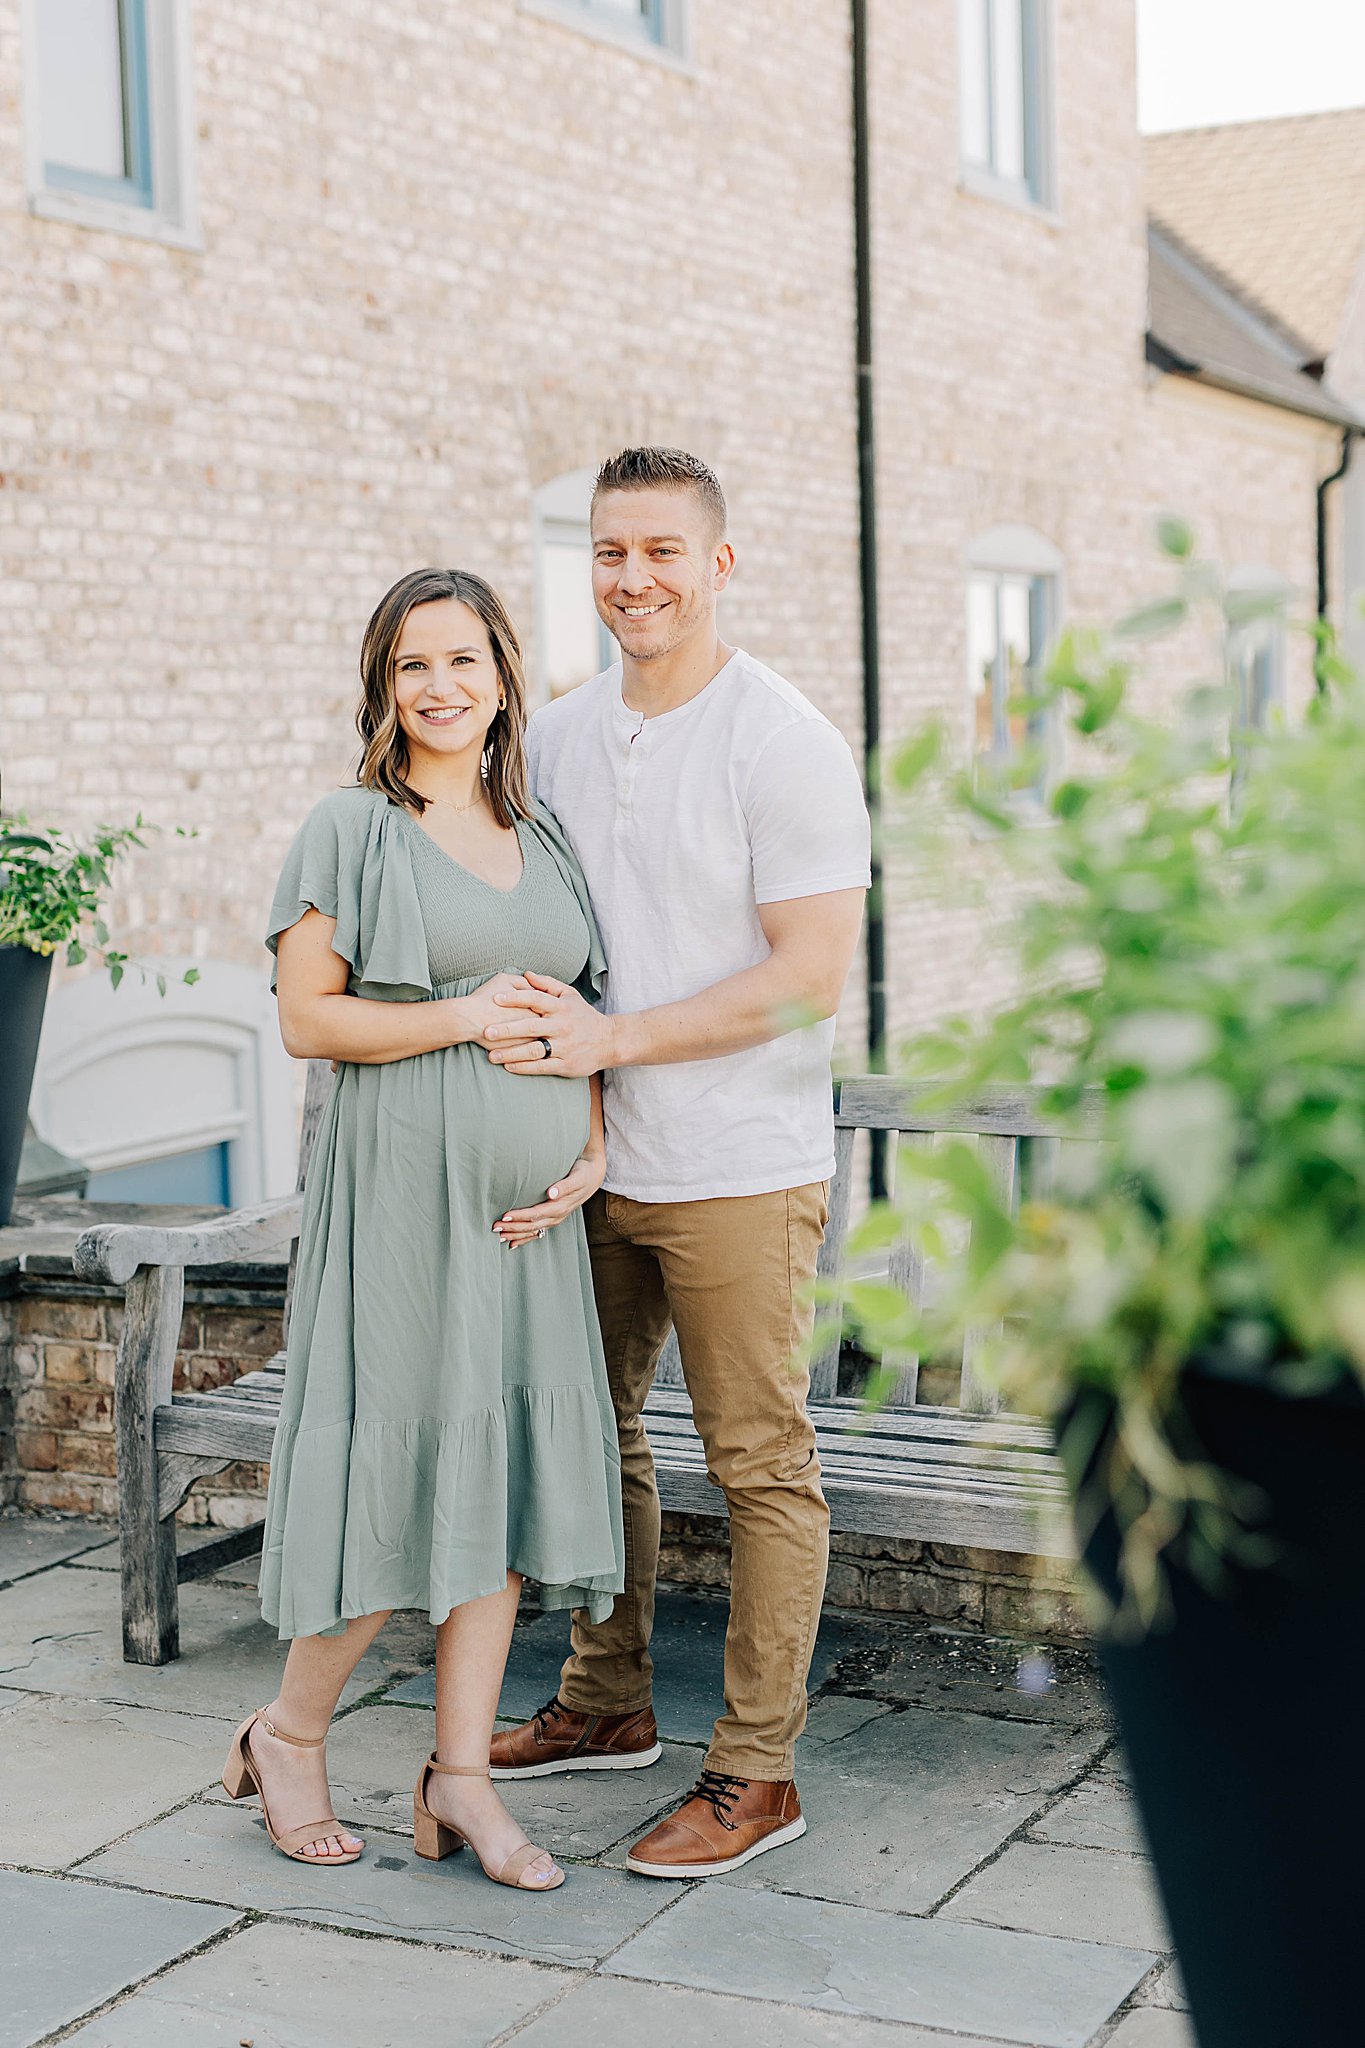 Mom and dad smiling during maternity photos